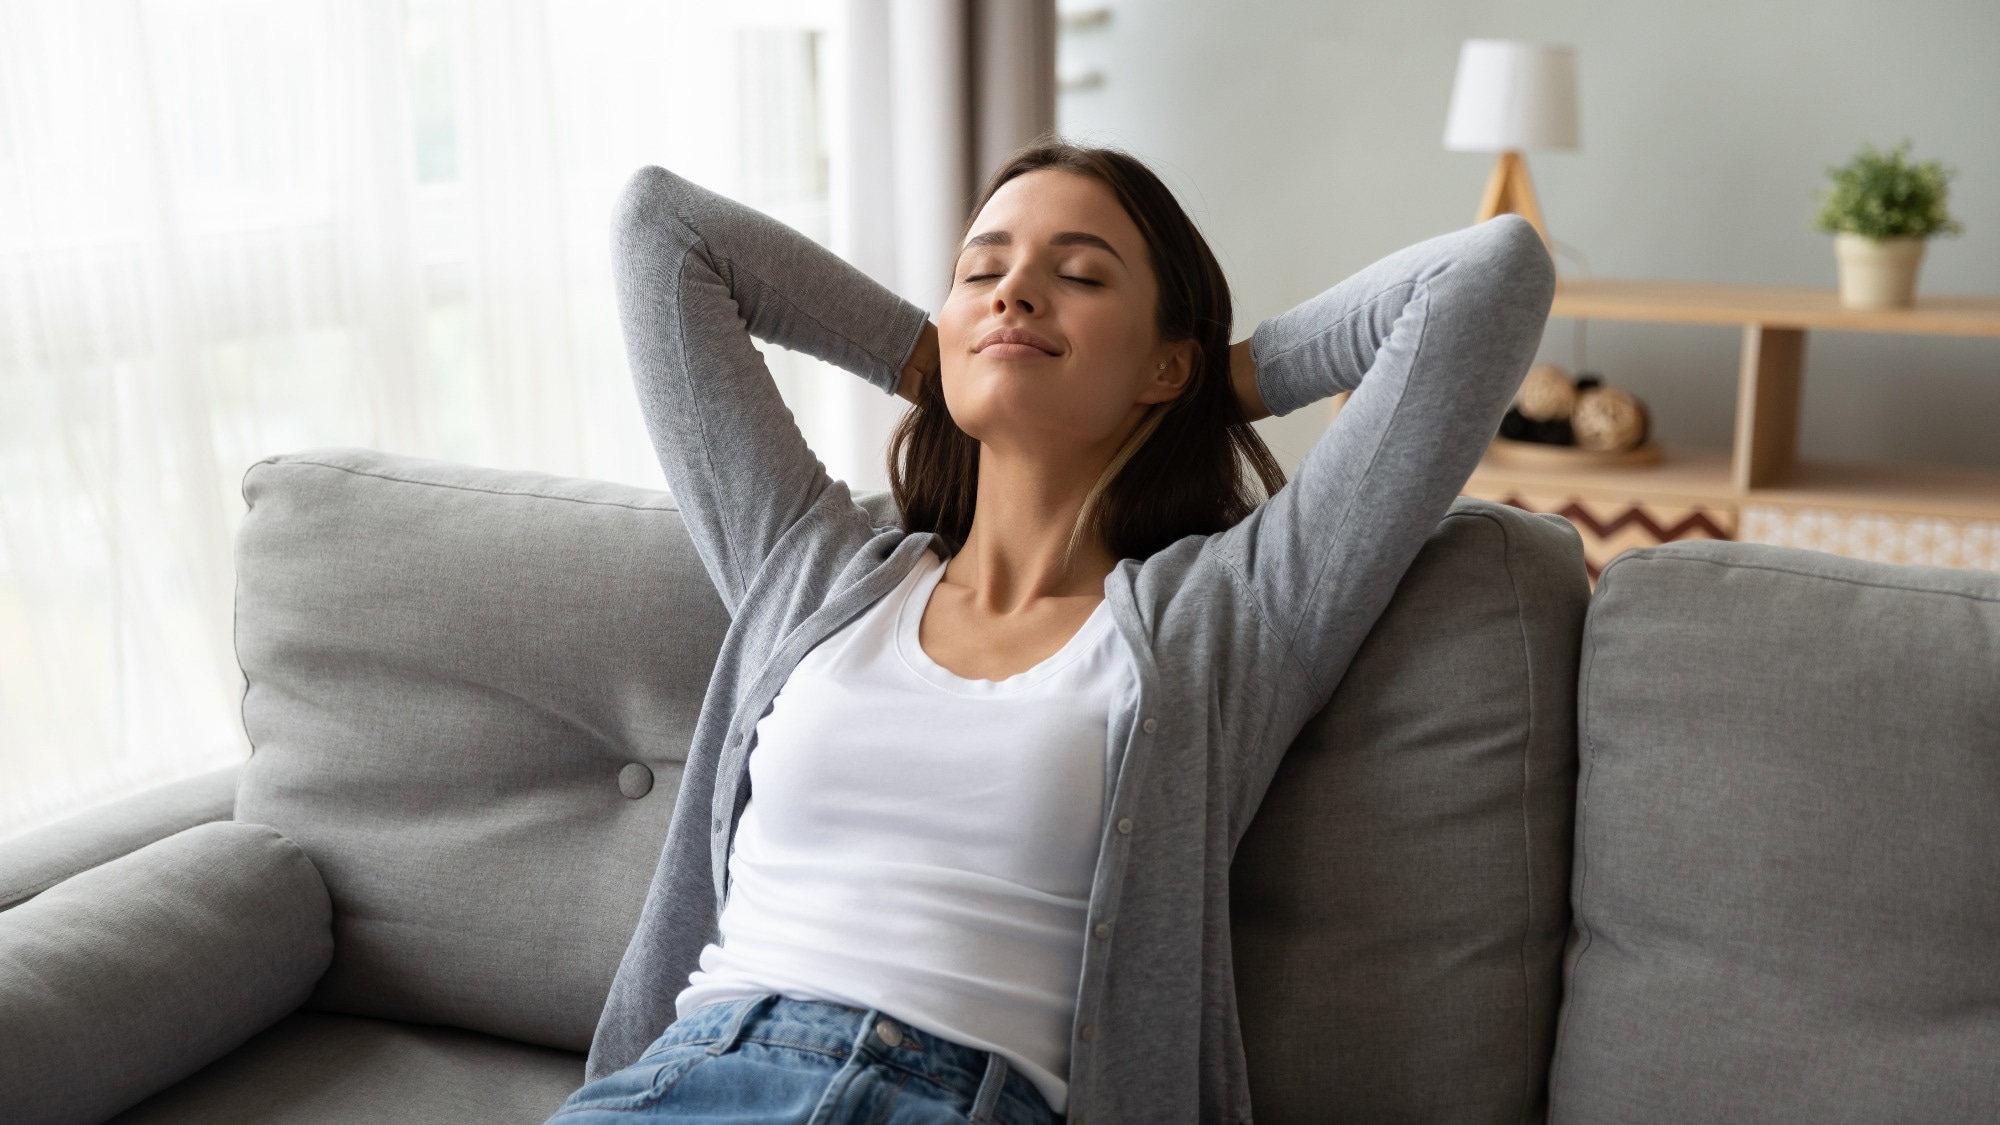 Study: Self-administered mindfulness interventions reduce stress in a large, randomized controlled multi-site study. Image Credit: fizkes / Shutterstock